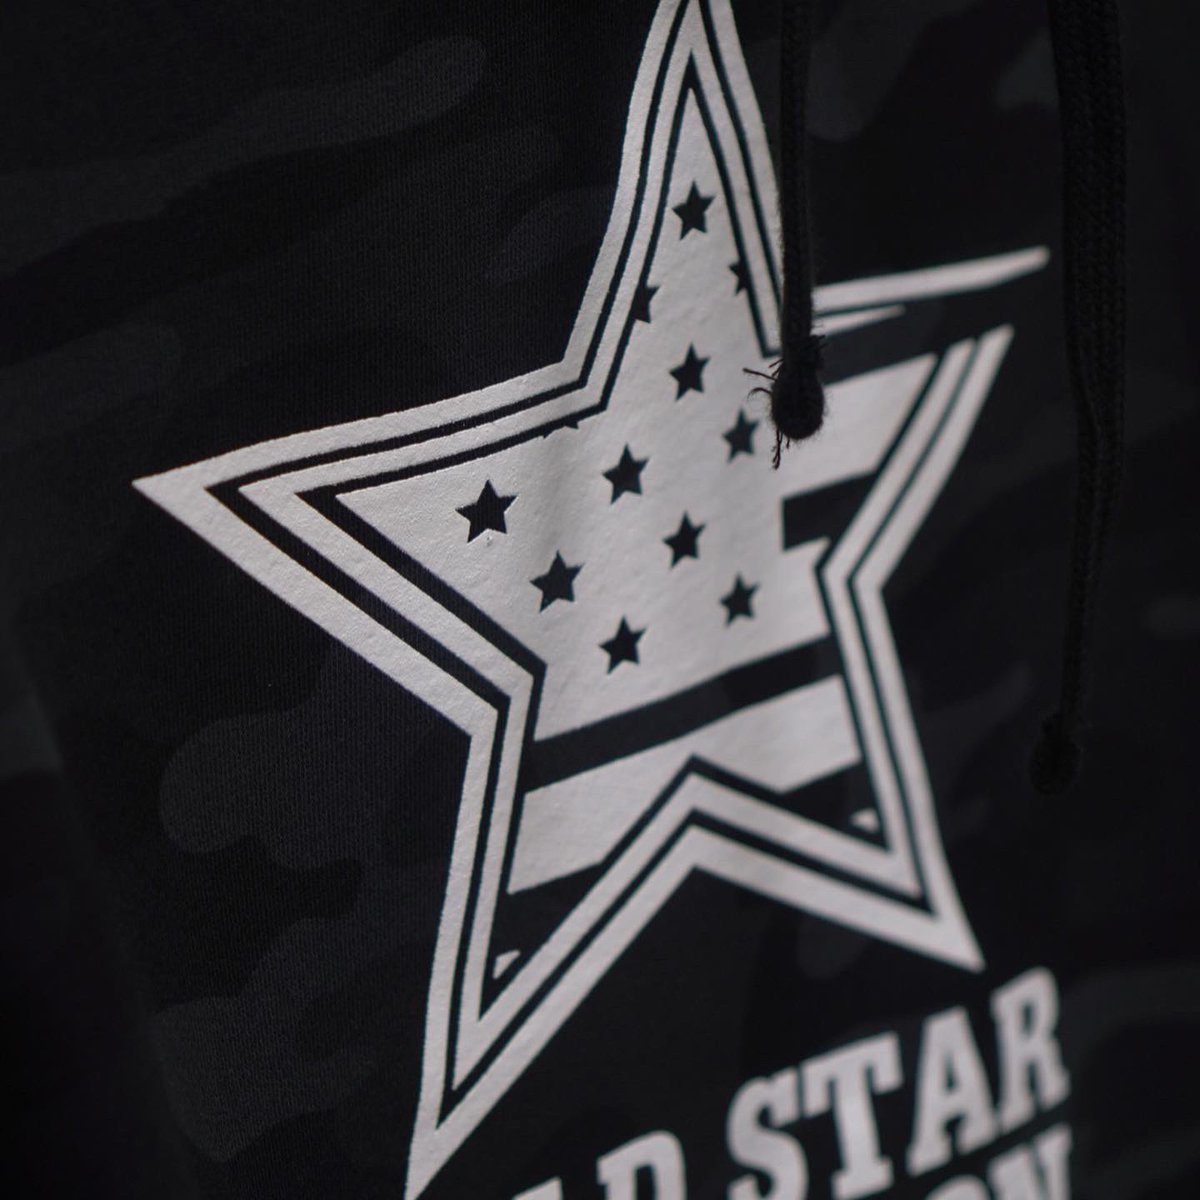 New Gold Star hoodies available now in black camo and woodland camo. These were a pre-order item, so if you ordered one, stop by any time this week to pick yours up! Additional quantities are VERY limited, but we have some in stock. Don’t wait if you are hoping to snag one